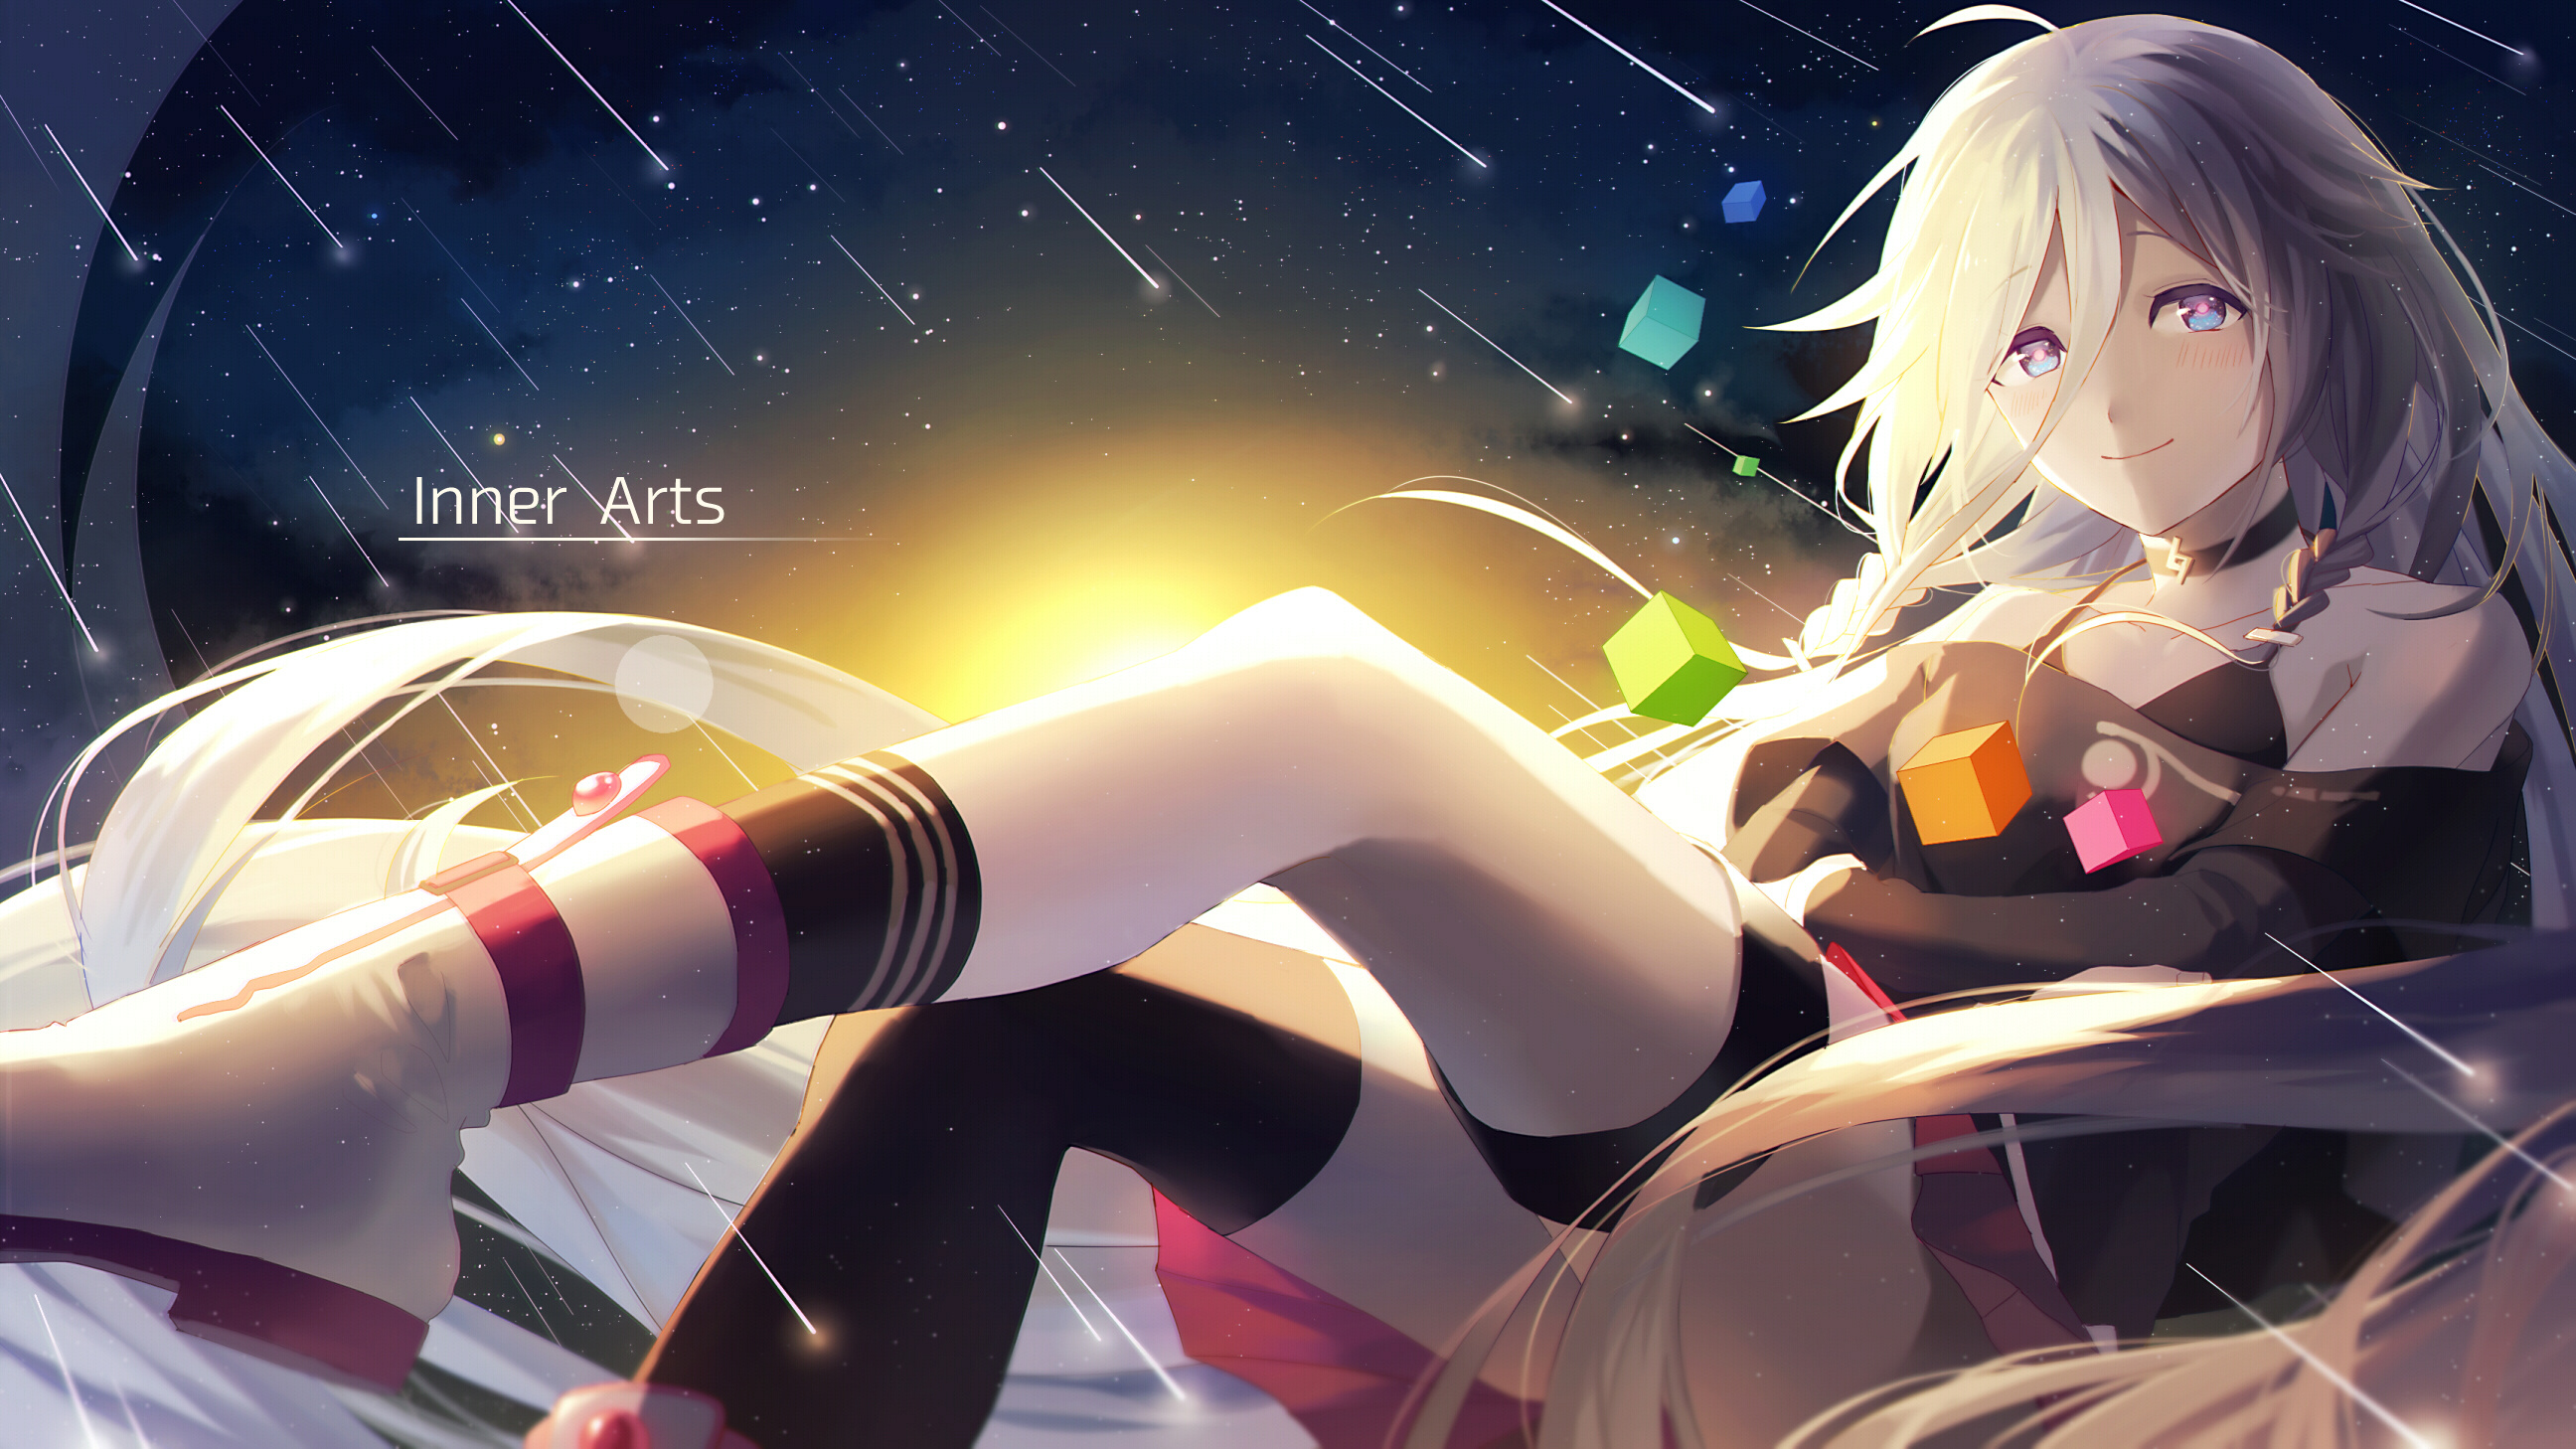 IA Vocaloid wallpapers, High-quality download, HD images, Hatsune Miku tribute, 2600x1460 HD Desktop